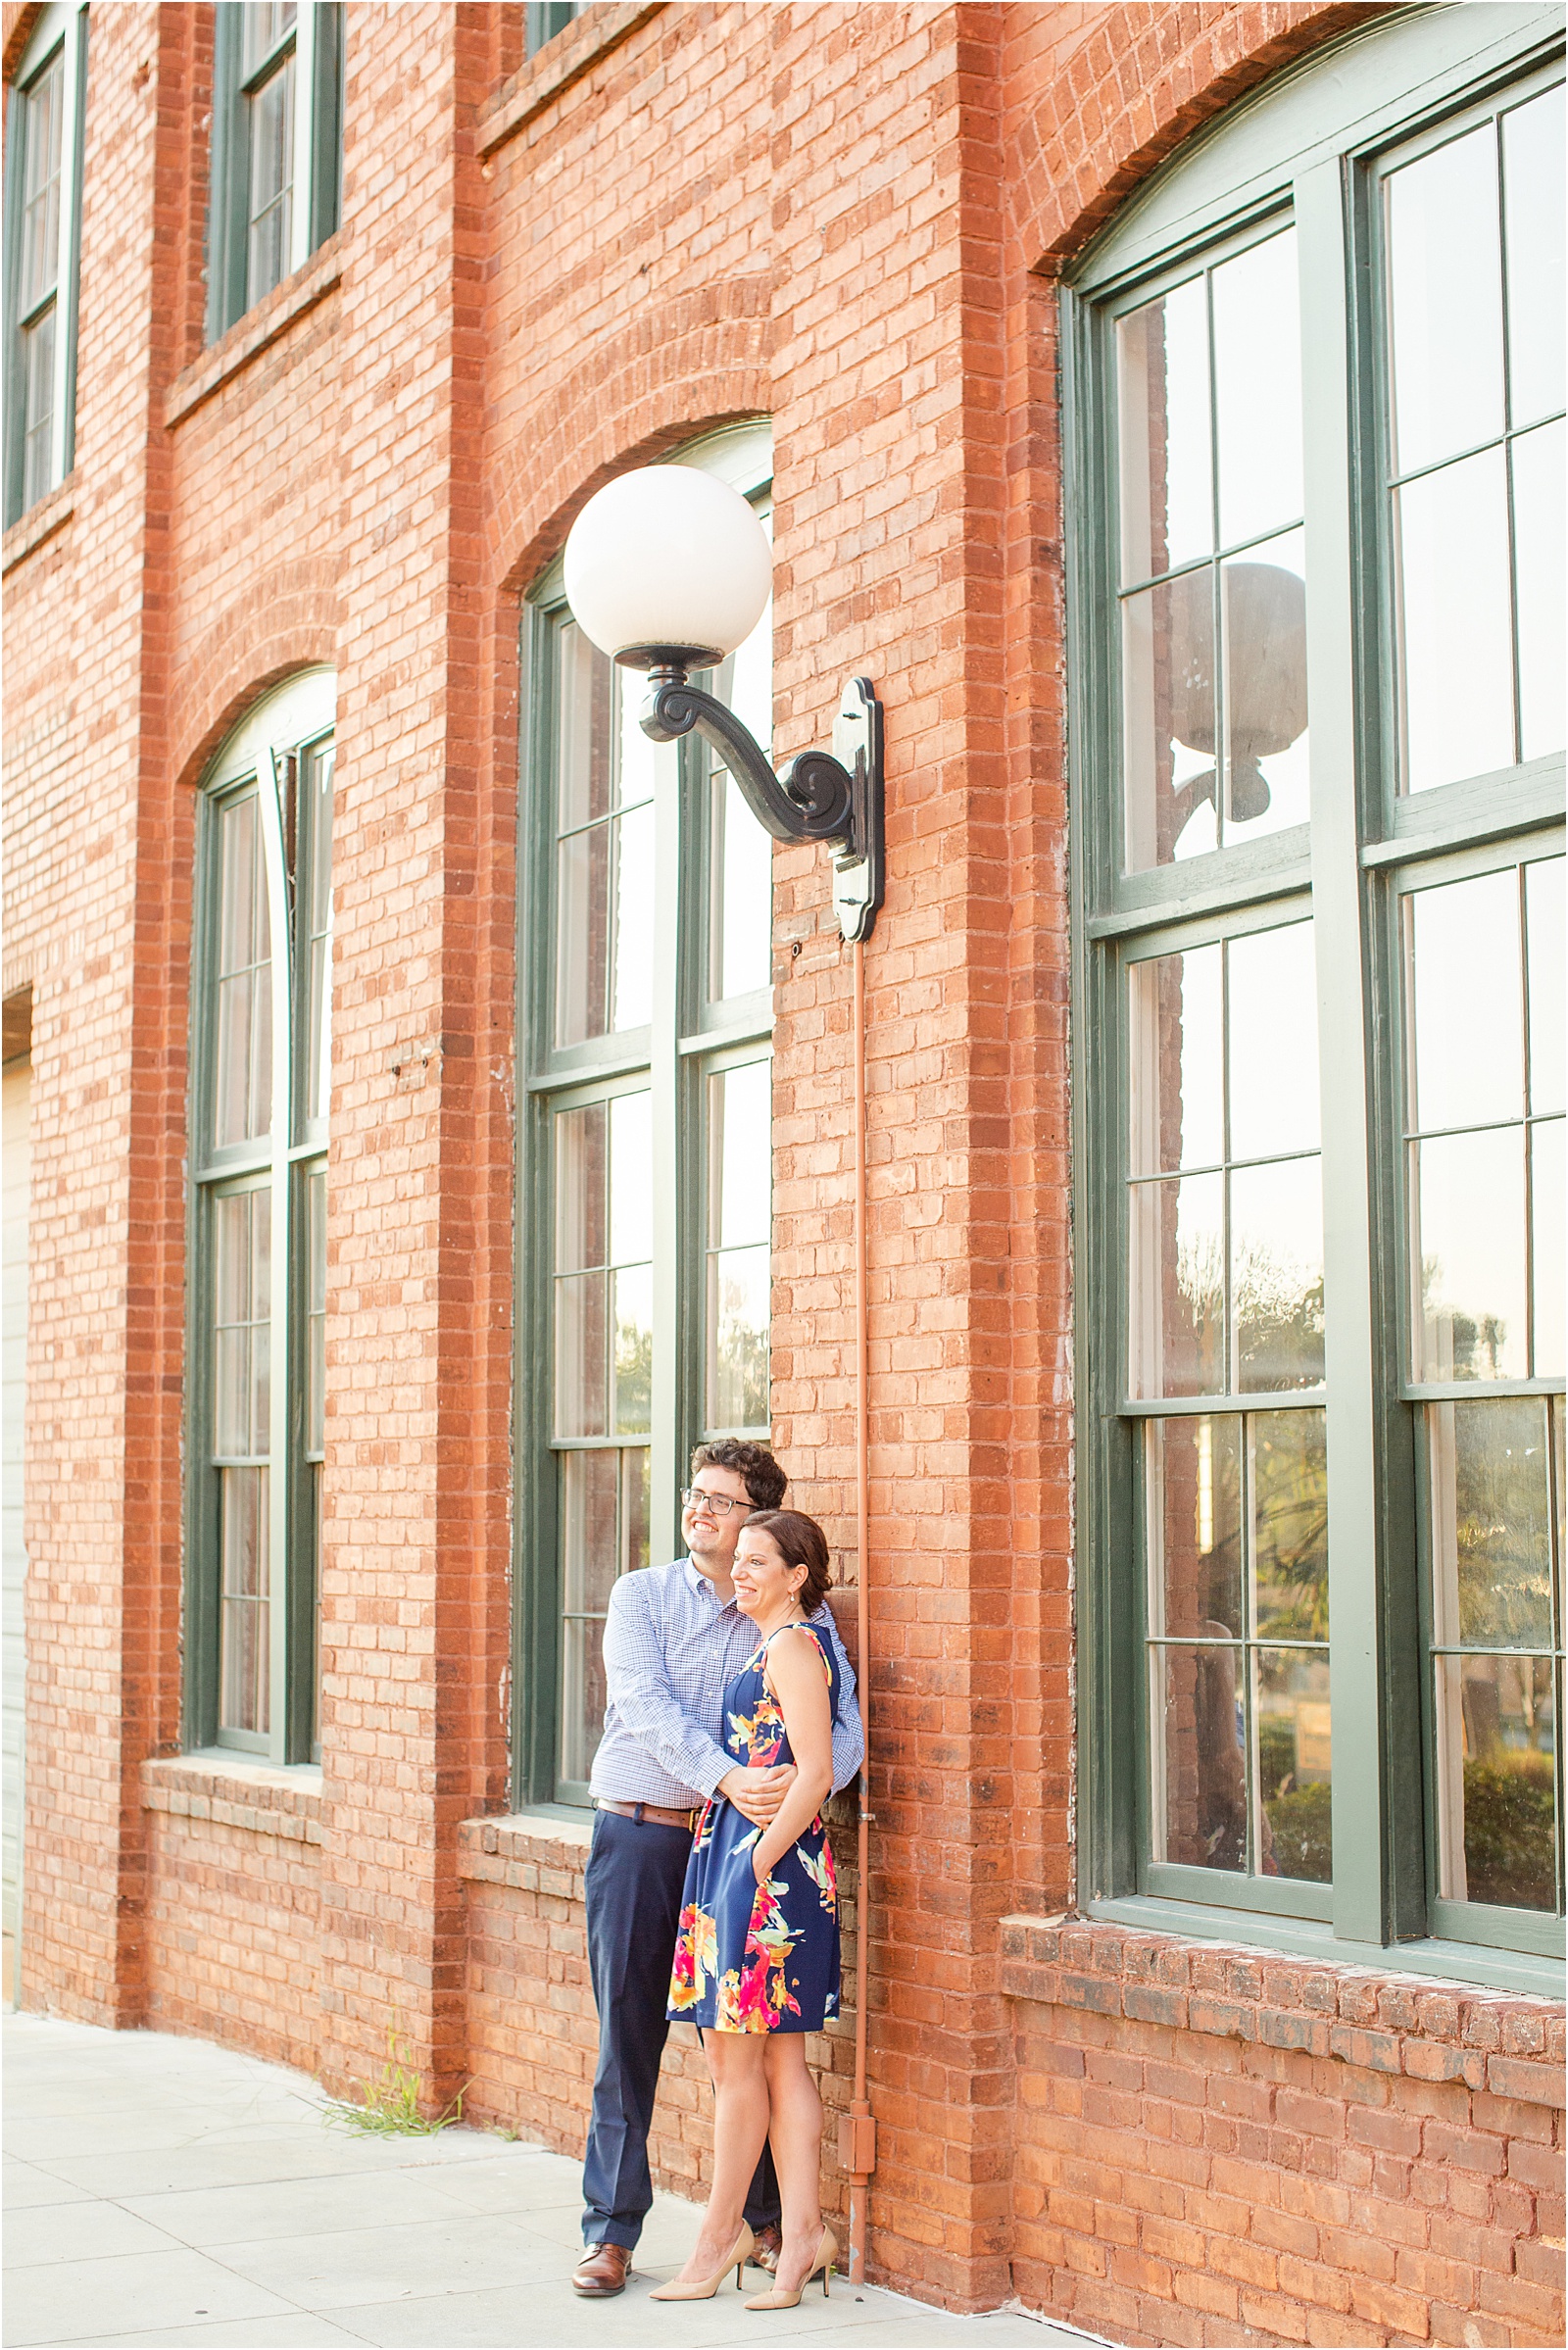 Couple hugging in front of building with large windows